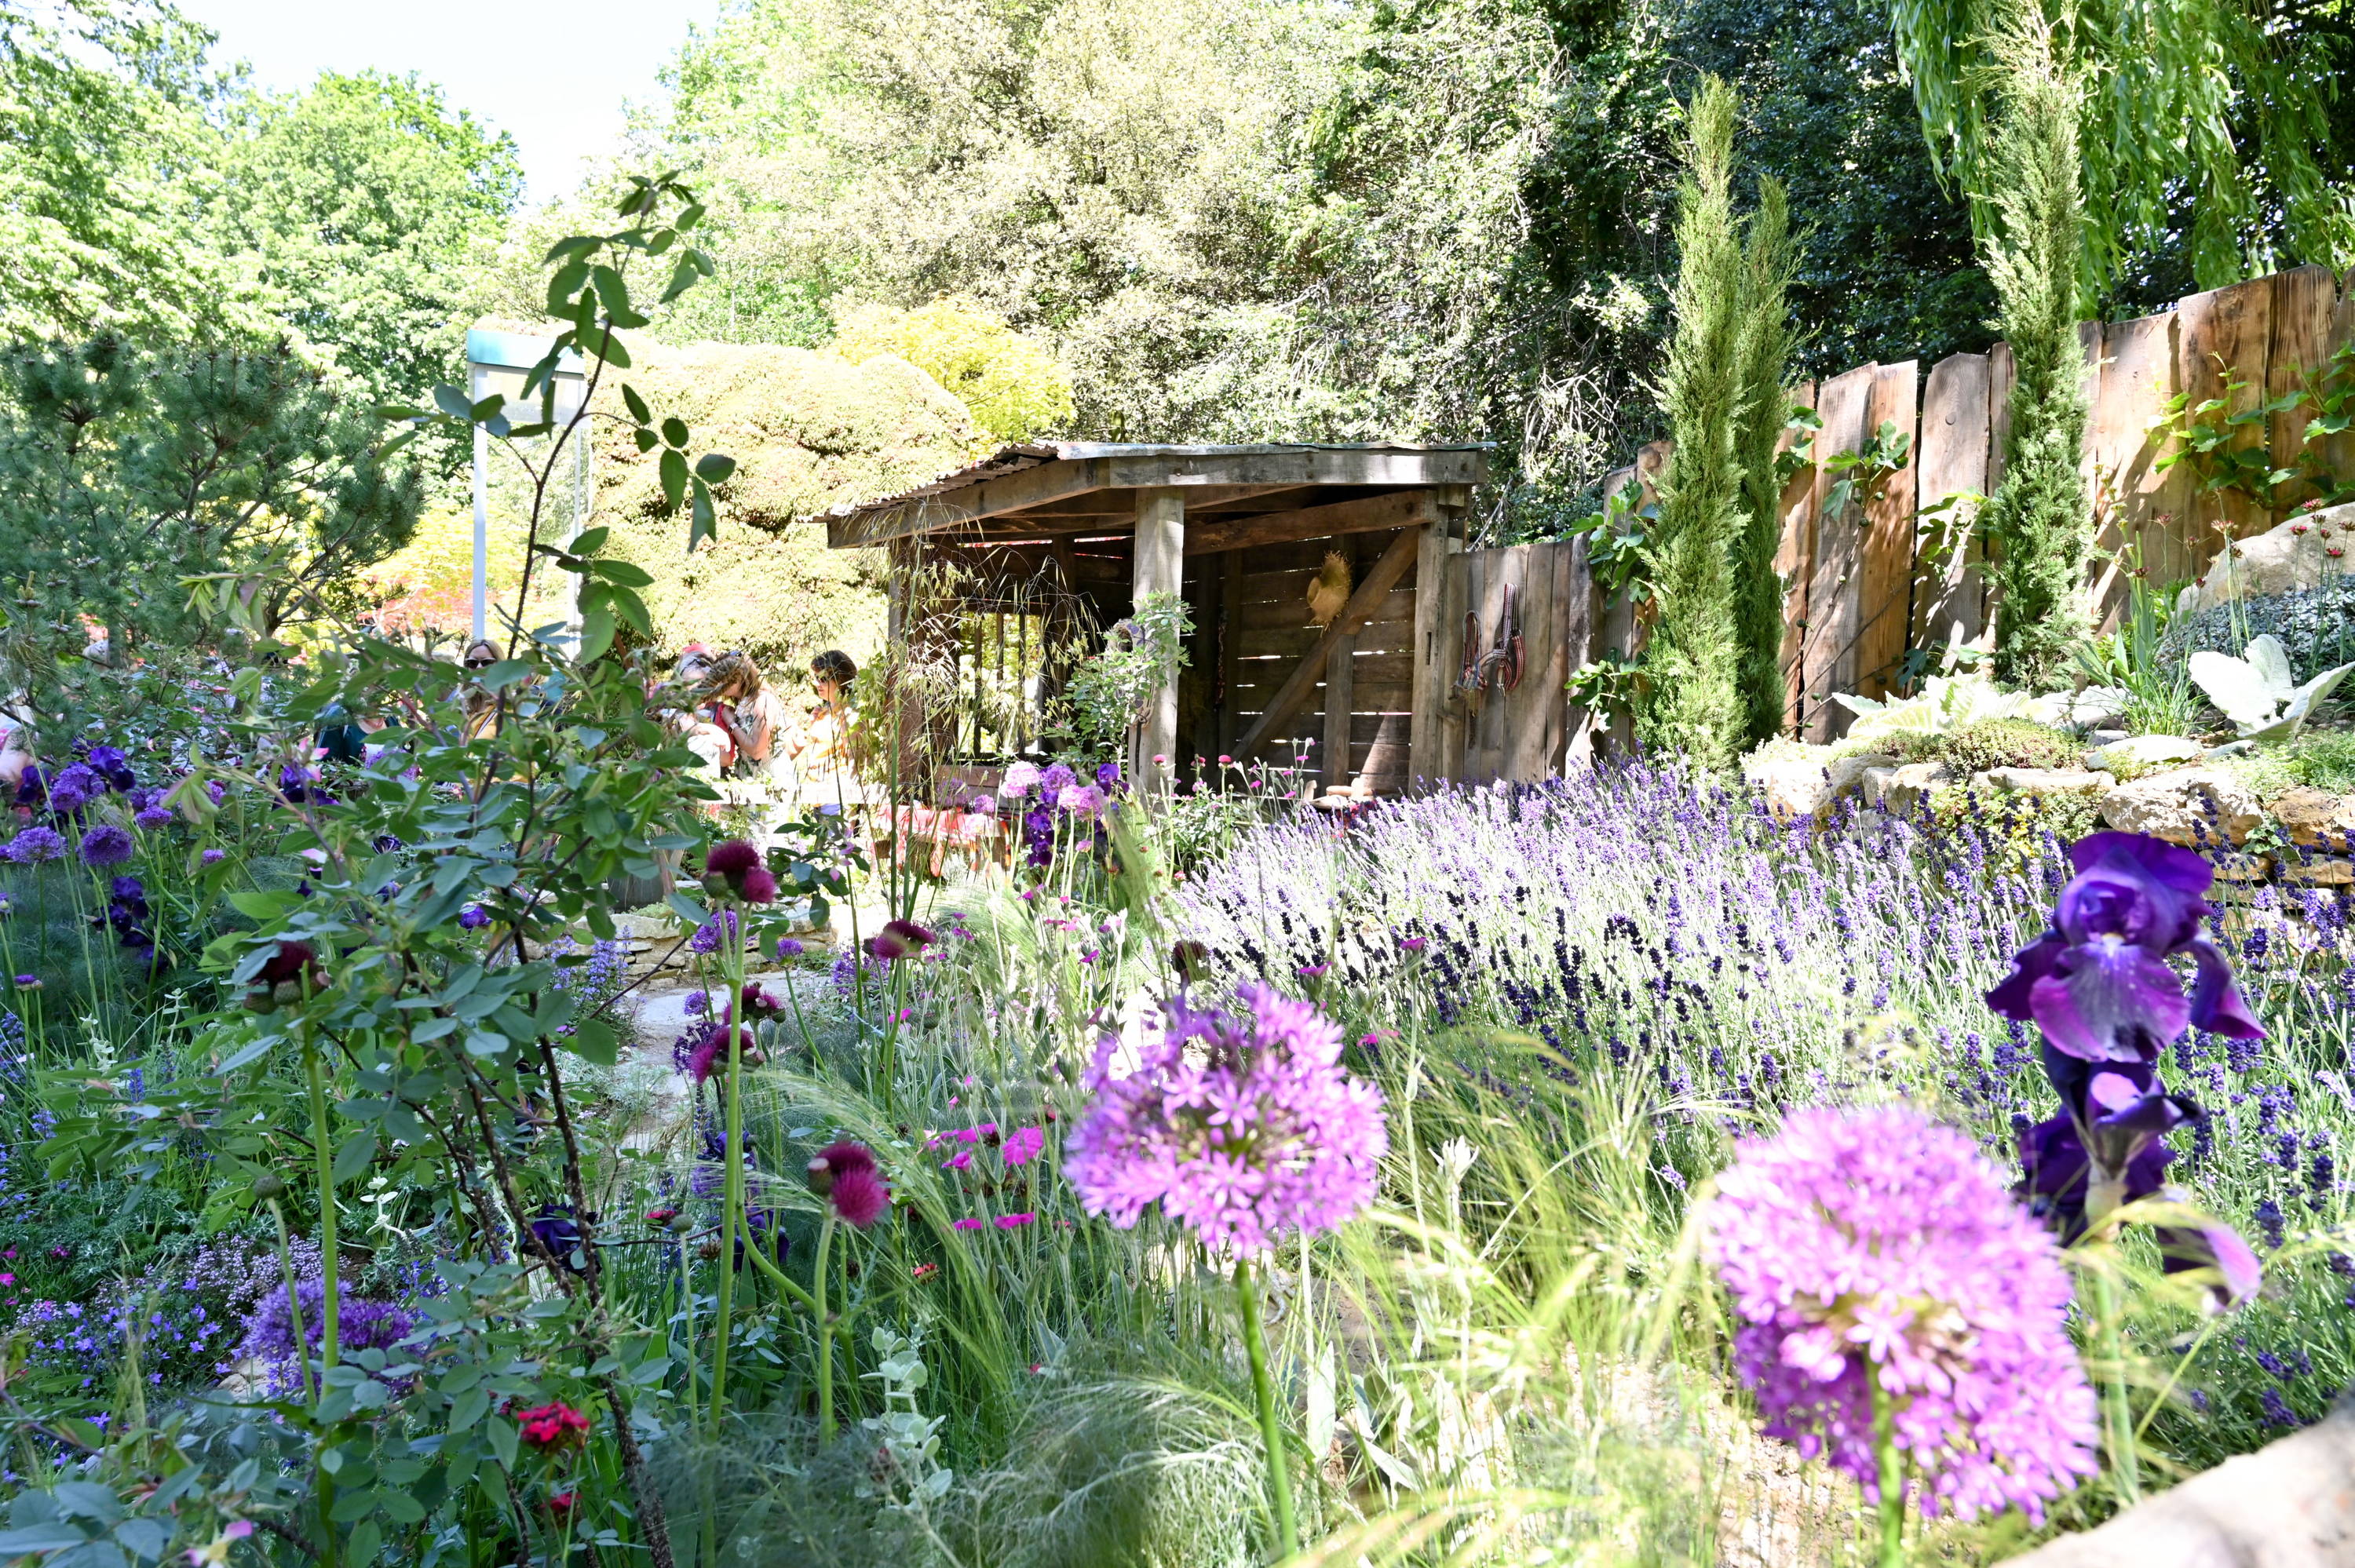 Donkey Sanctuary Garden at the 2019 Chelsea Flower Show